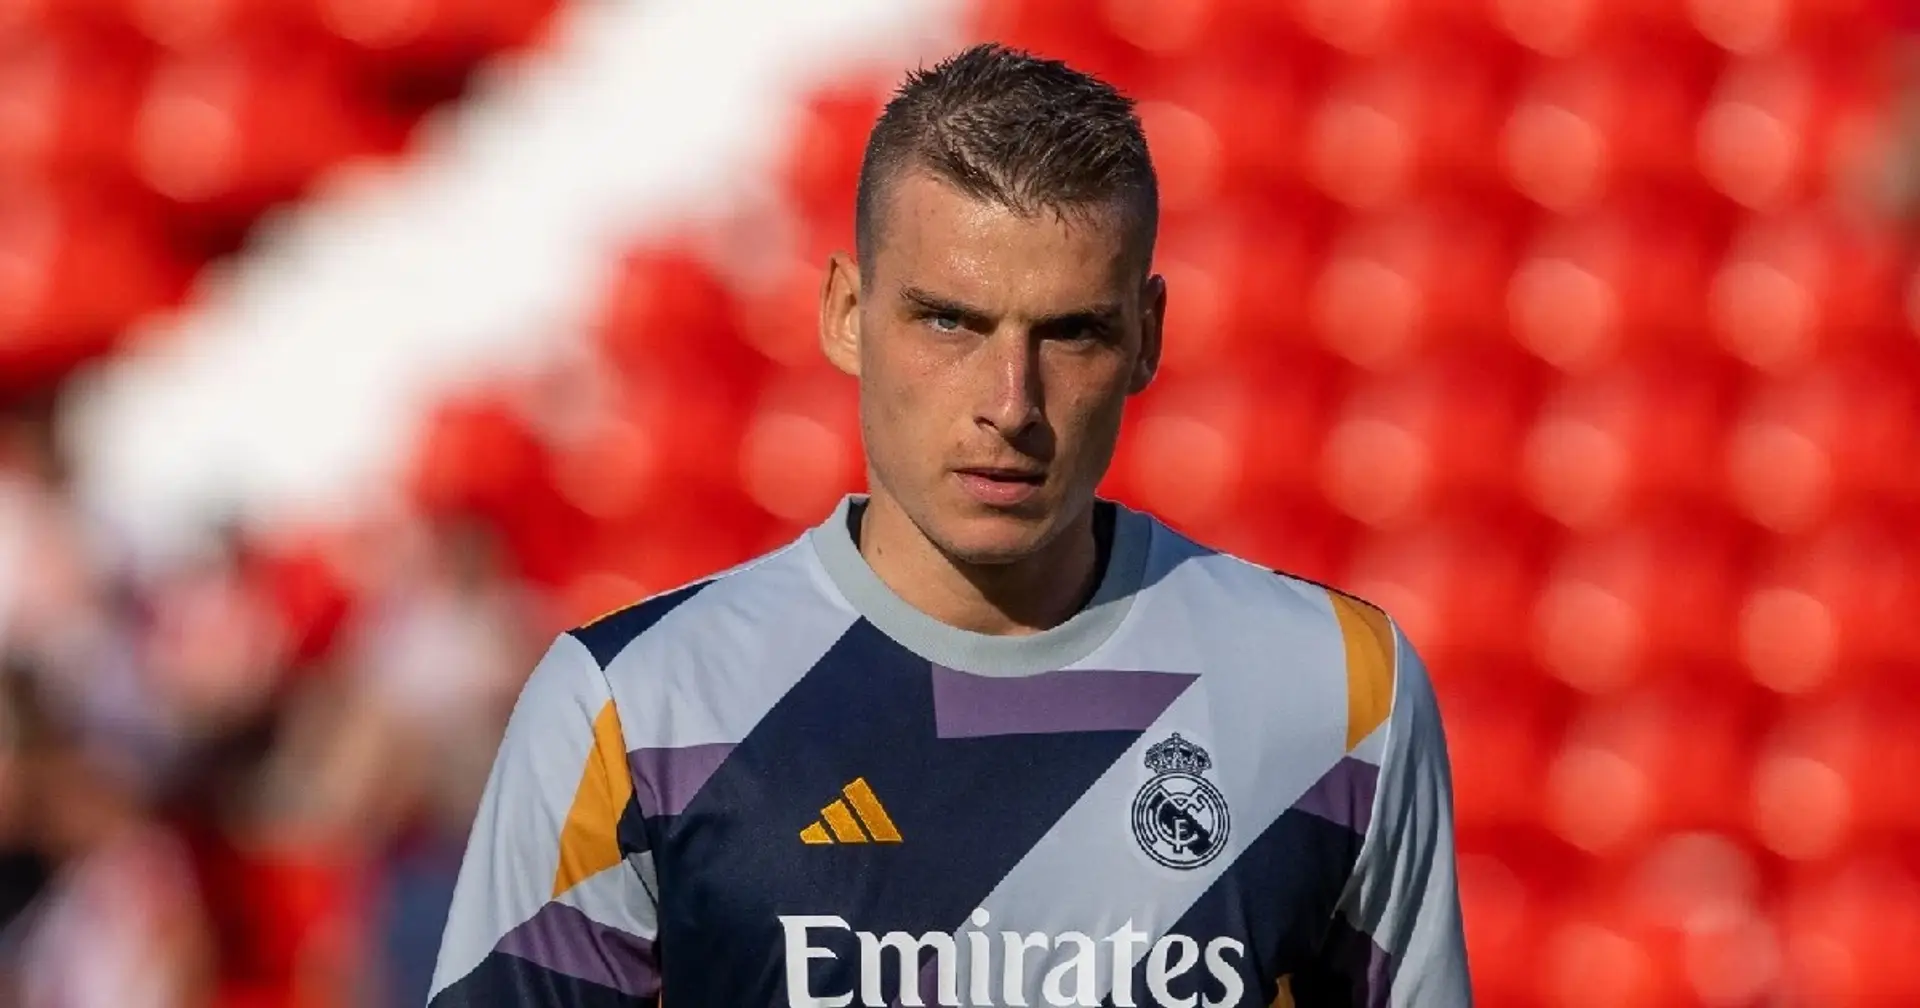 Real Madrid 'prepare new Lunin contract' & 2 more big stories you might've missed